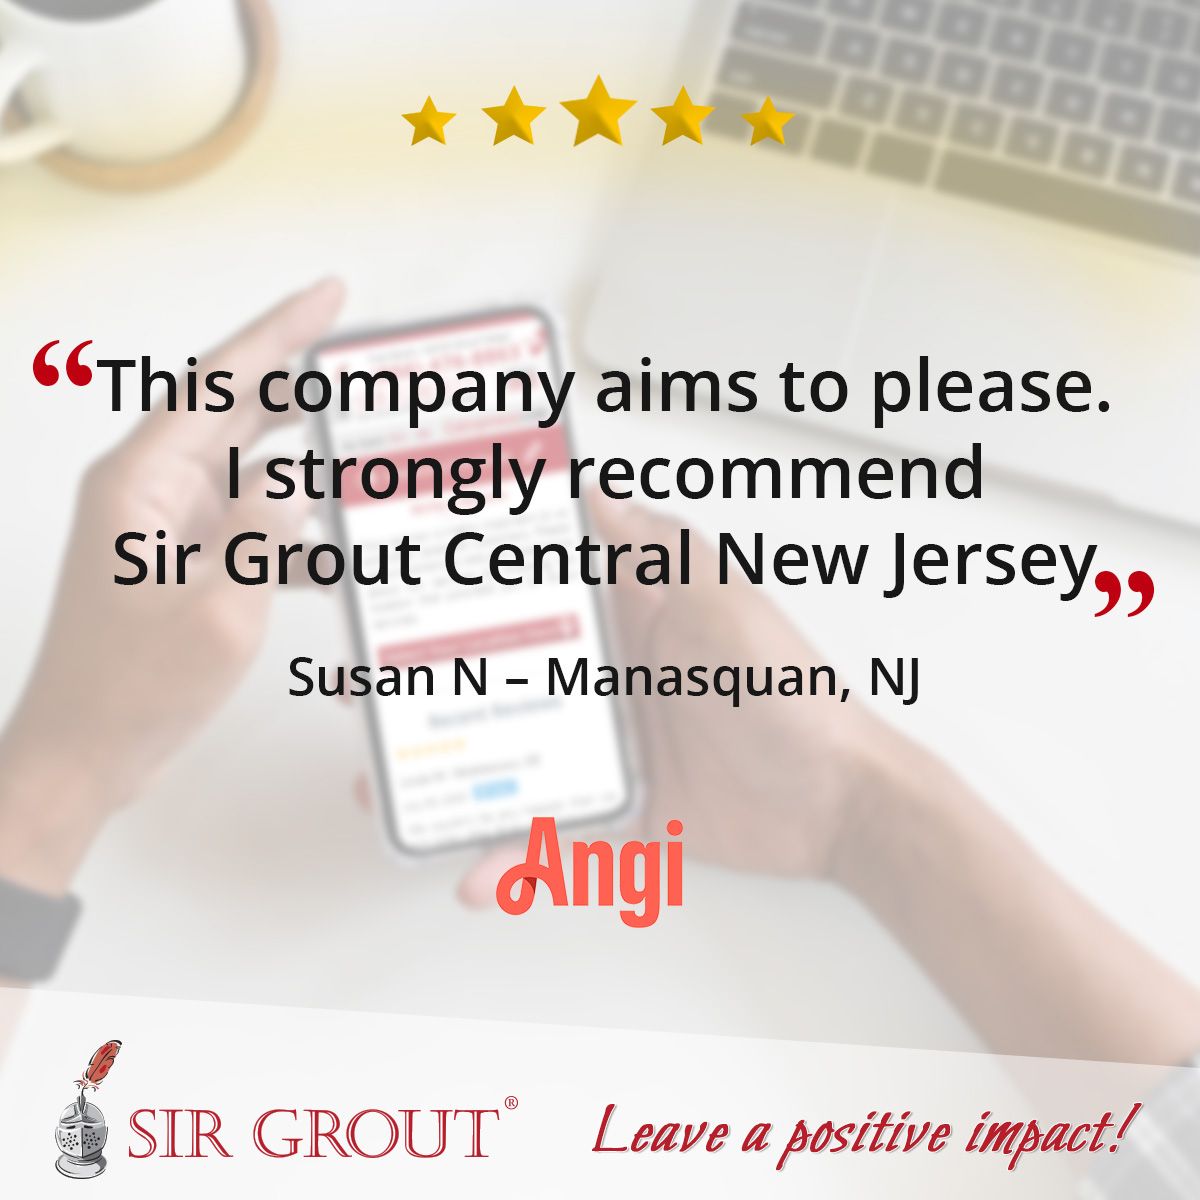 This company aims to please. I strongly recommend Sir Grout Central New Jersey.